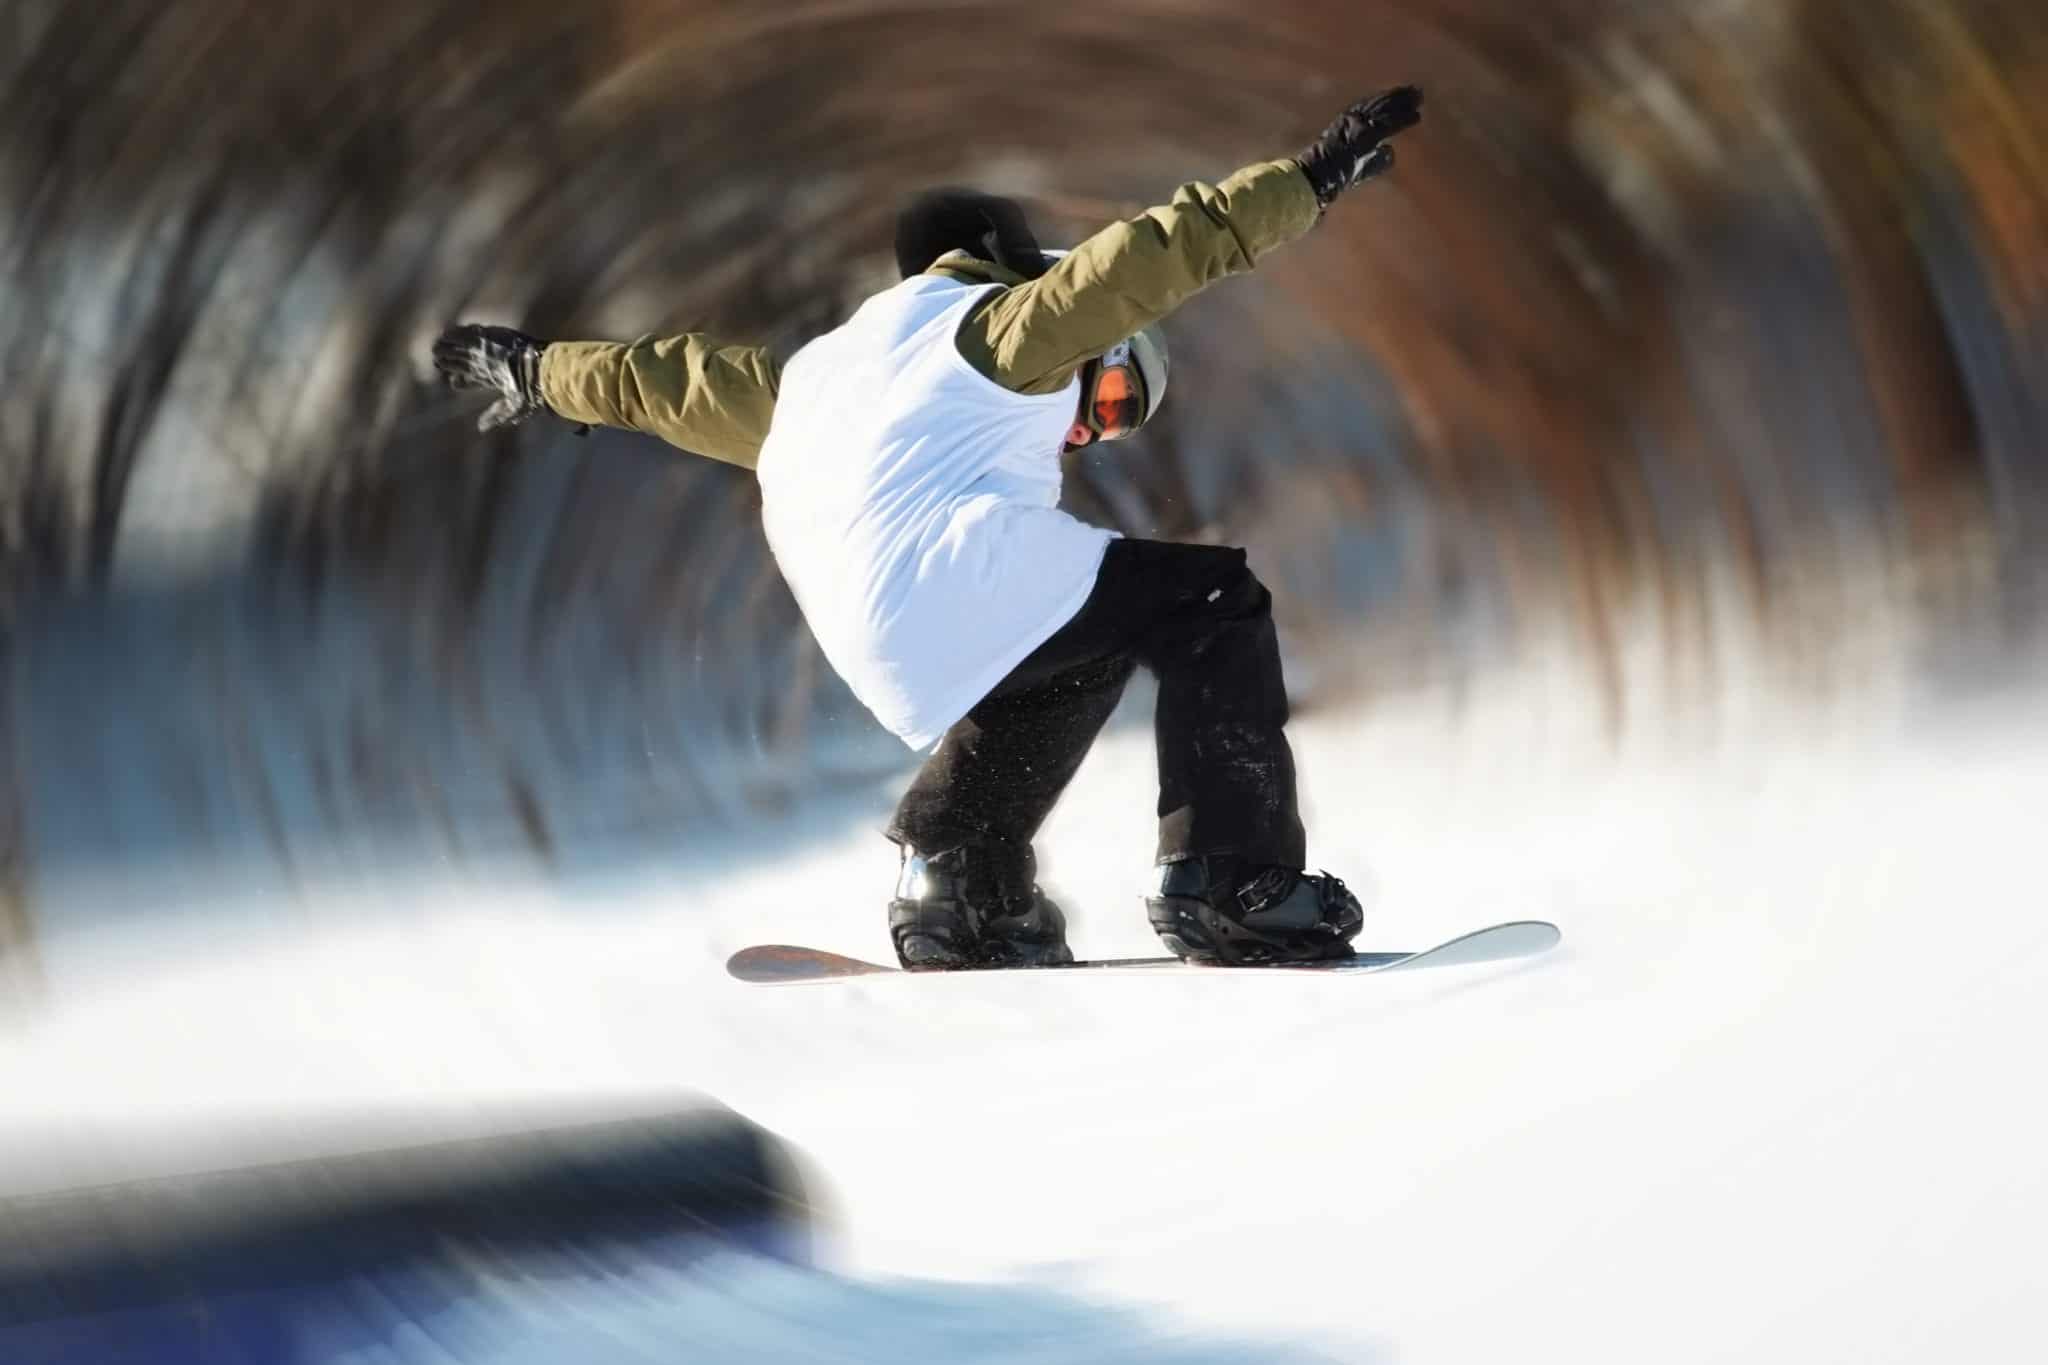 Snowboarder making a jump with arms wide